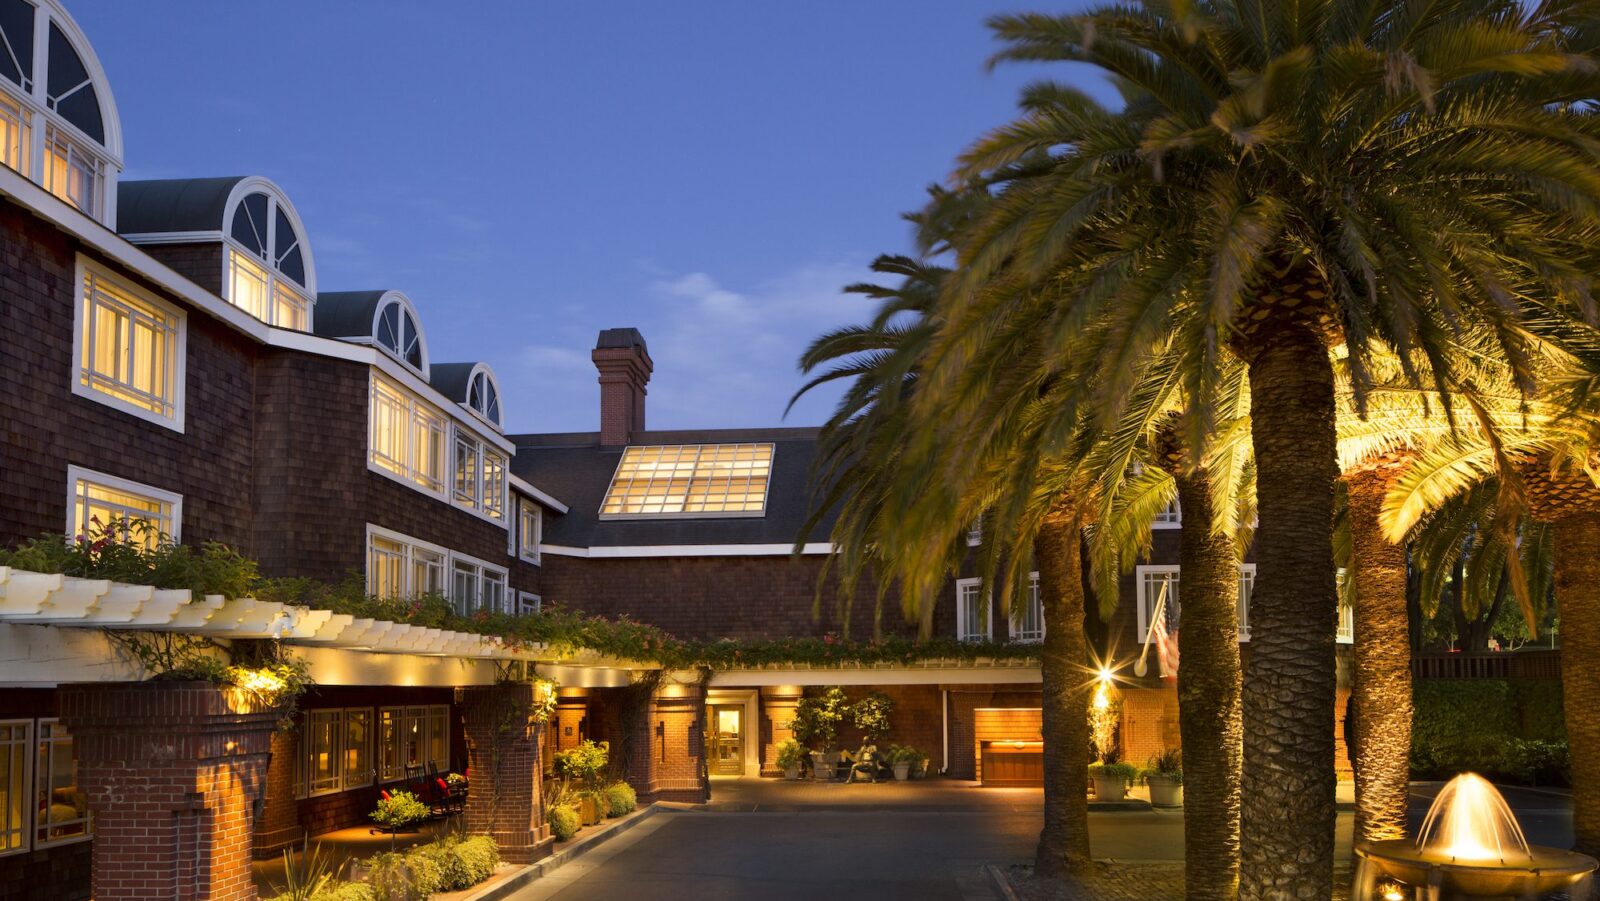 Stanford Park Hotel exterior at night